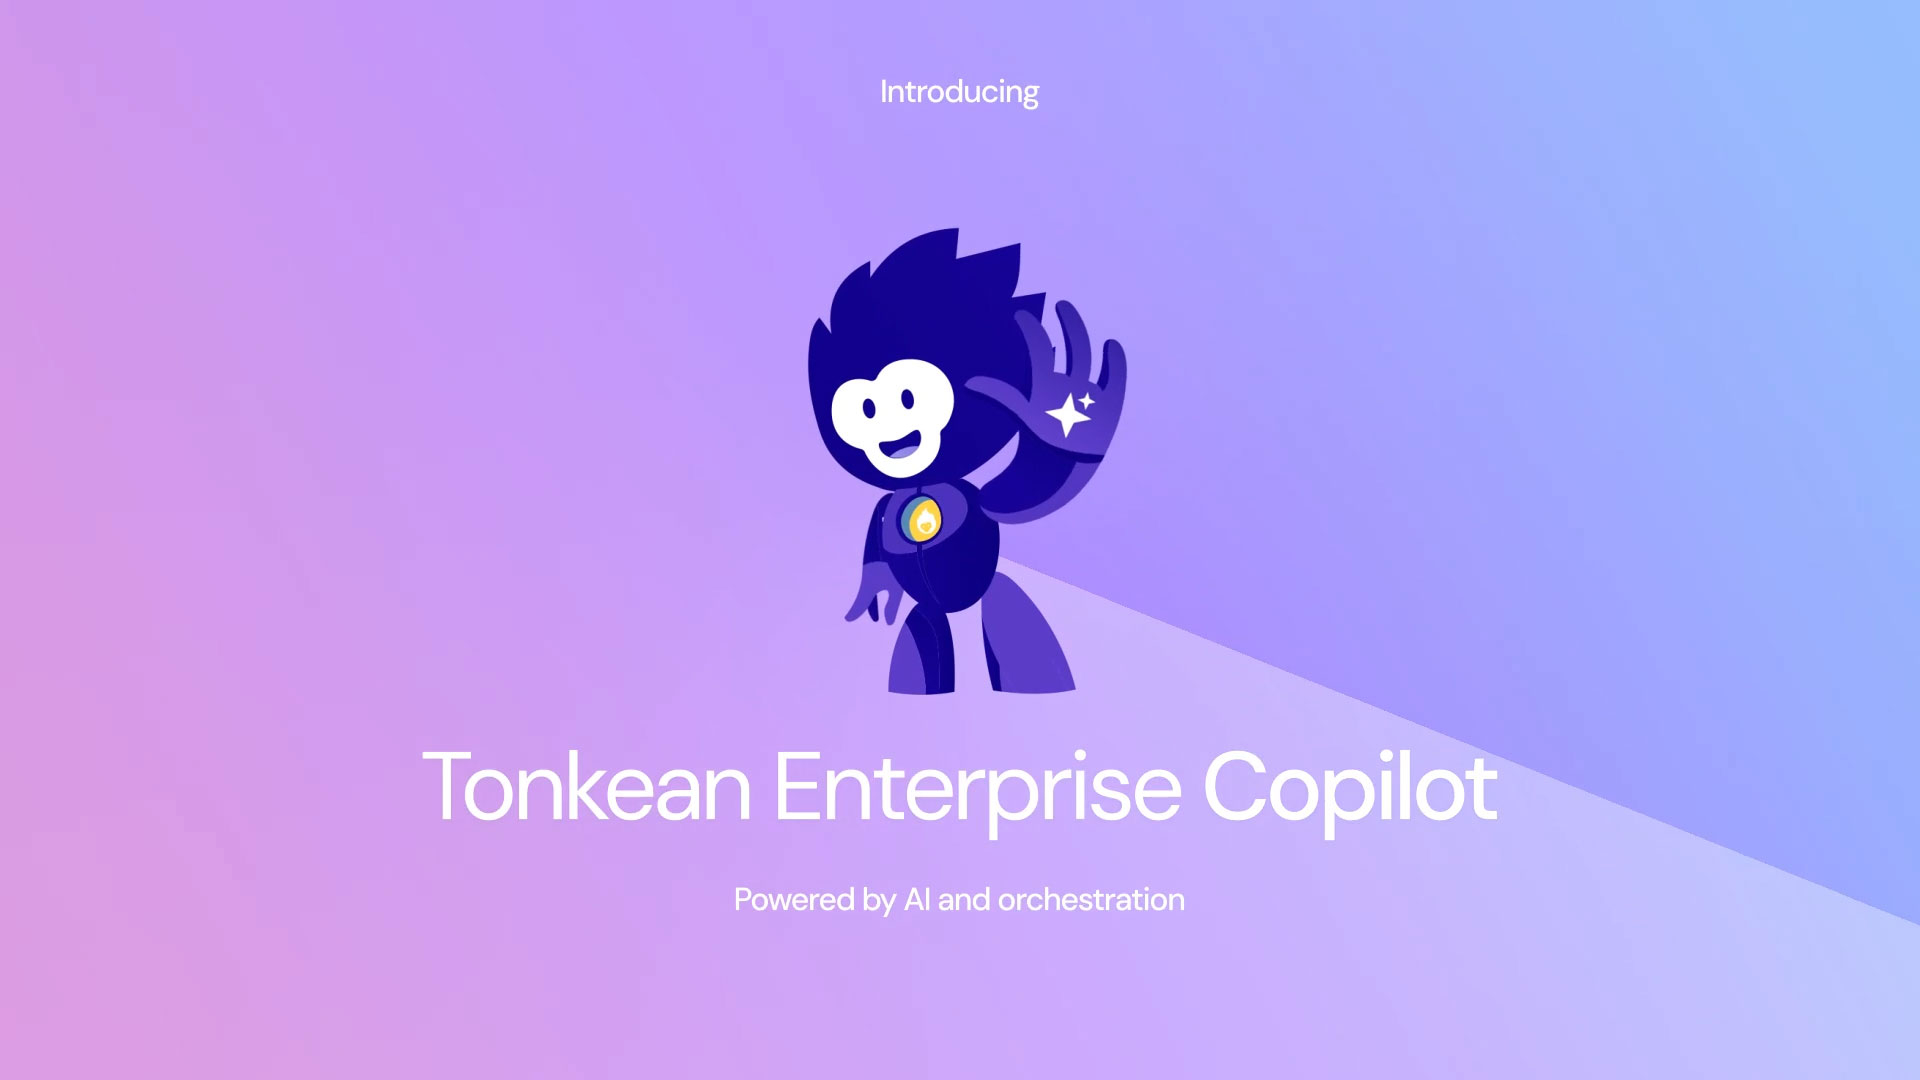 Introducing the Tonkean Enterprise Copilot, End-to-End AI and Orchestration To Eliminate Busywork